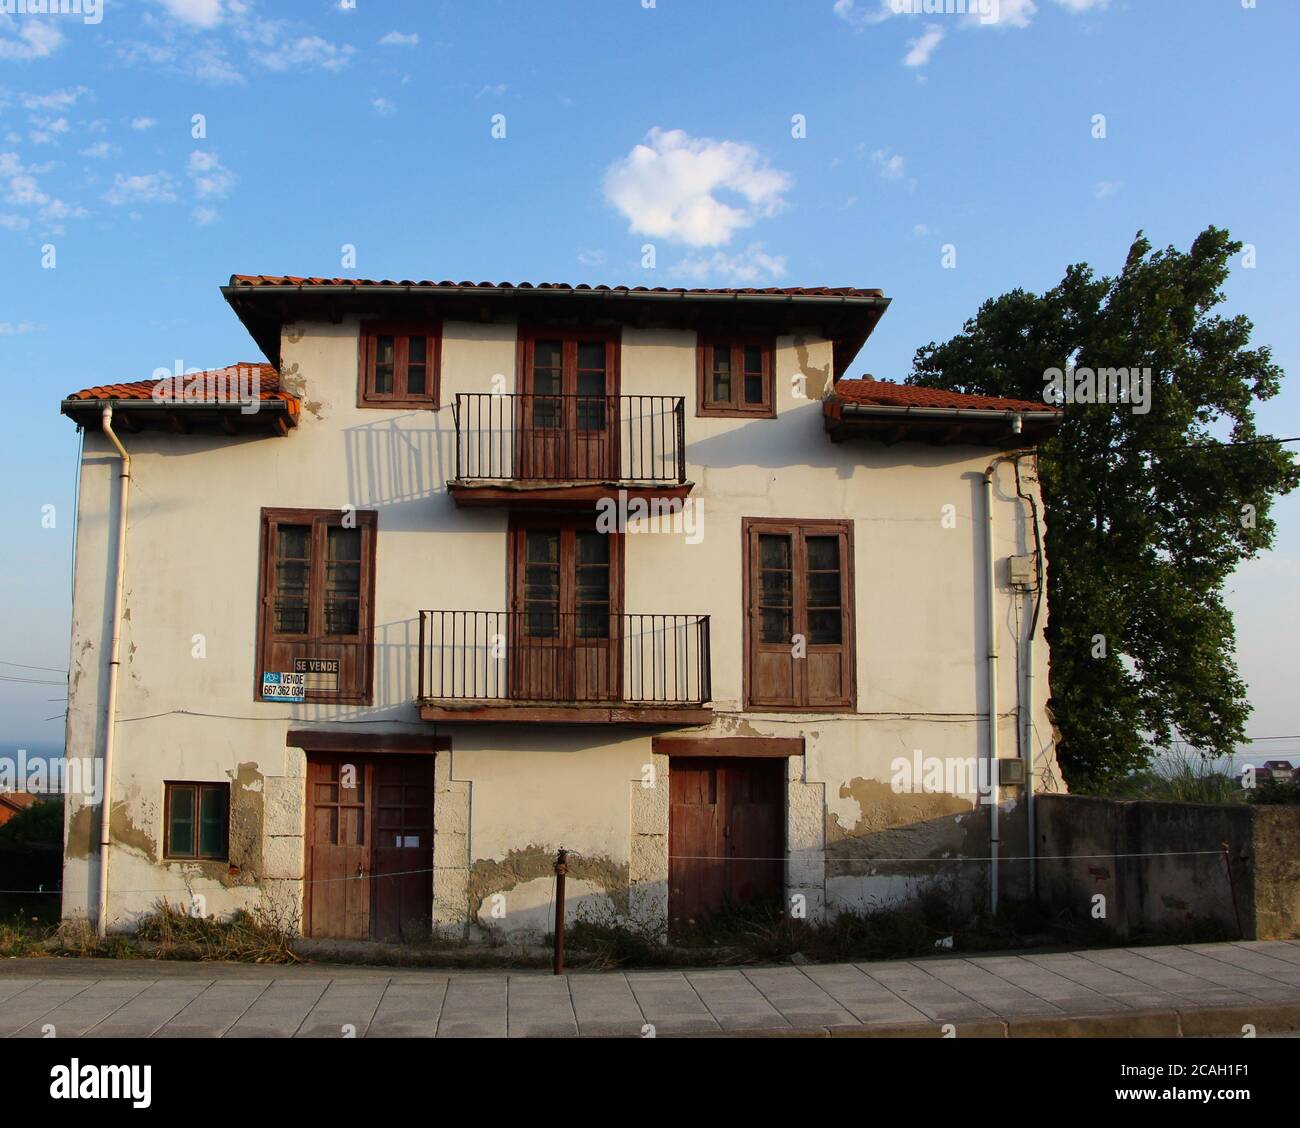 Old delapidated house for sale in Cueto Cantabria Spain Stock Photo